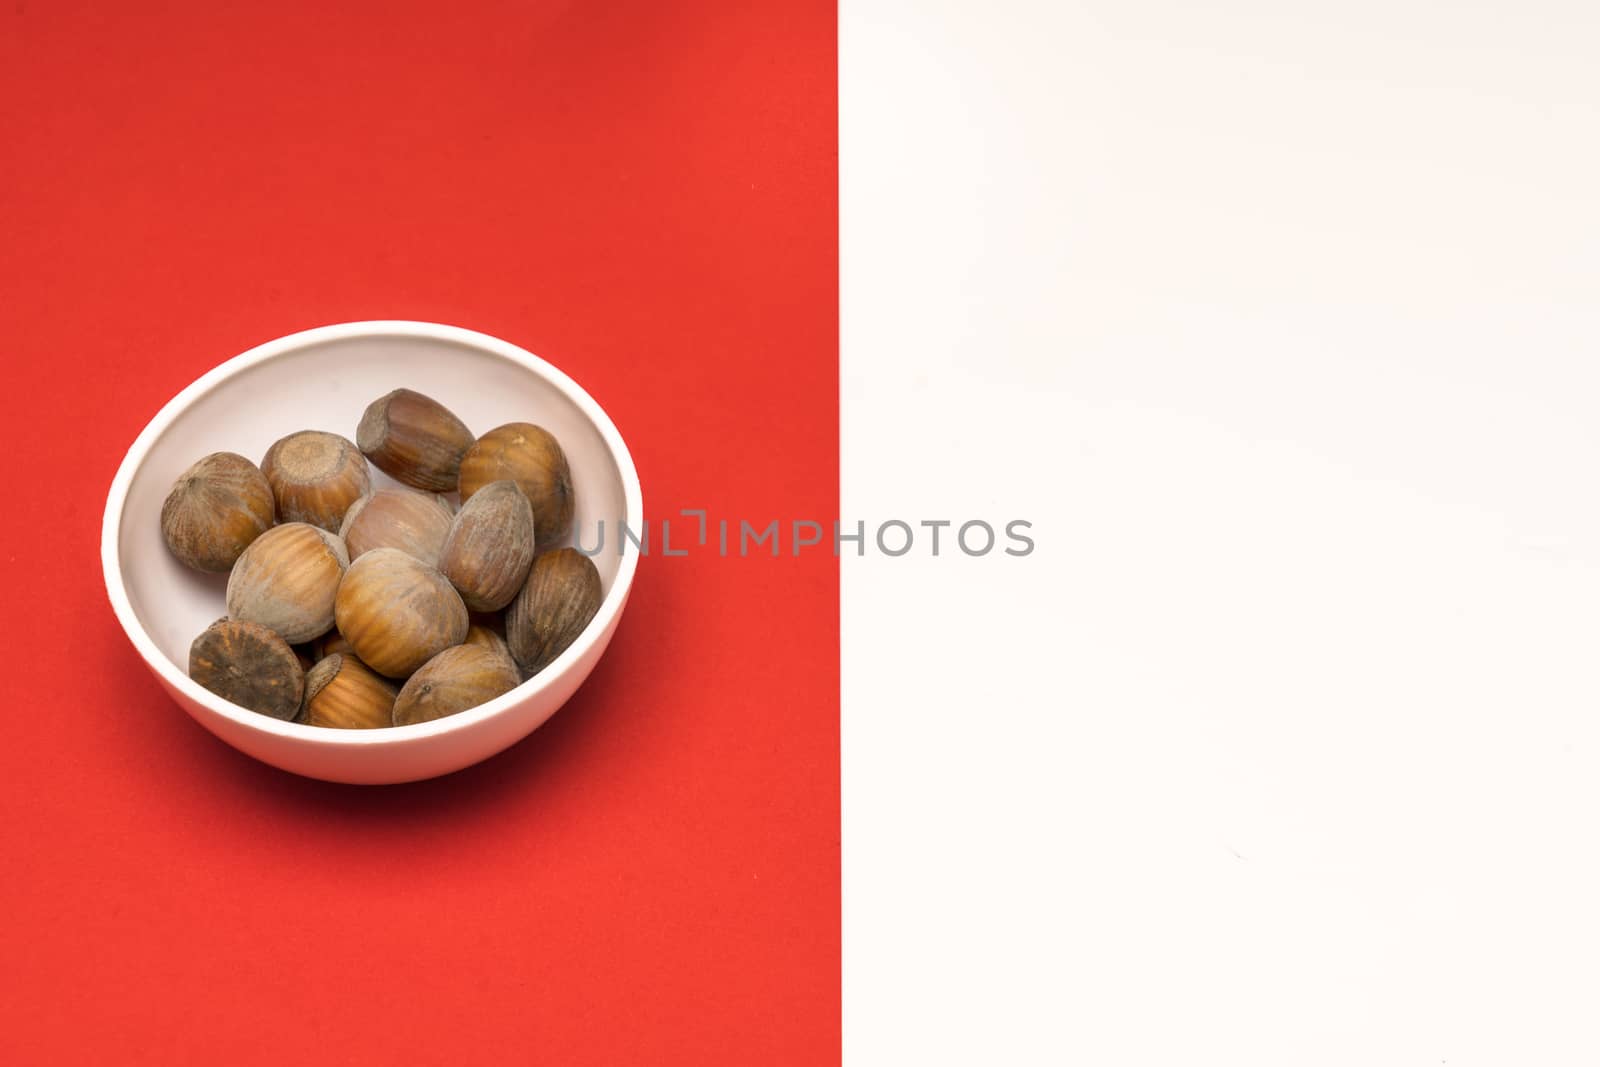 hazelnuts in a bowl on a colored background